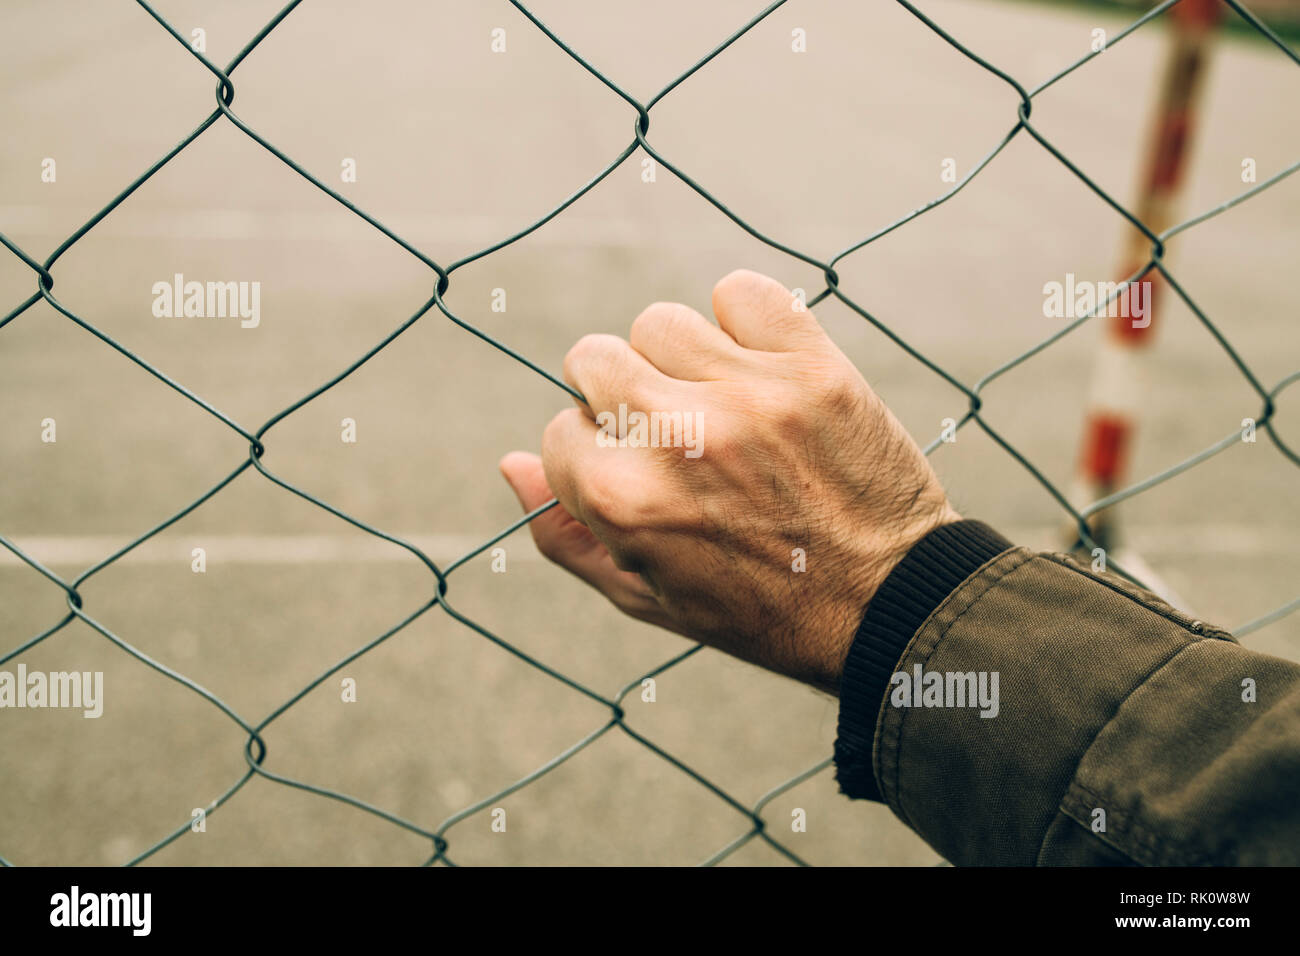 Male hand on chainlink fence, illegal immigration concept Stock Photo